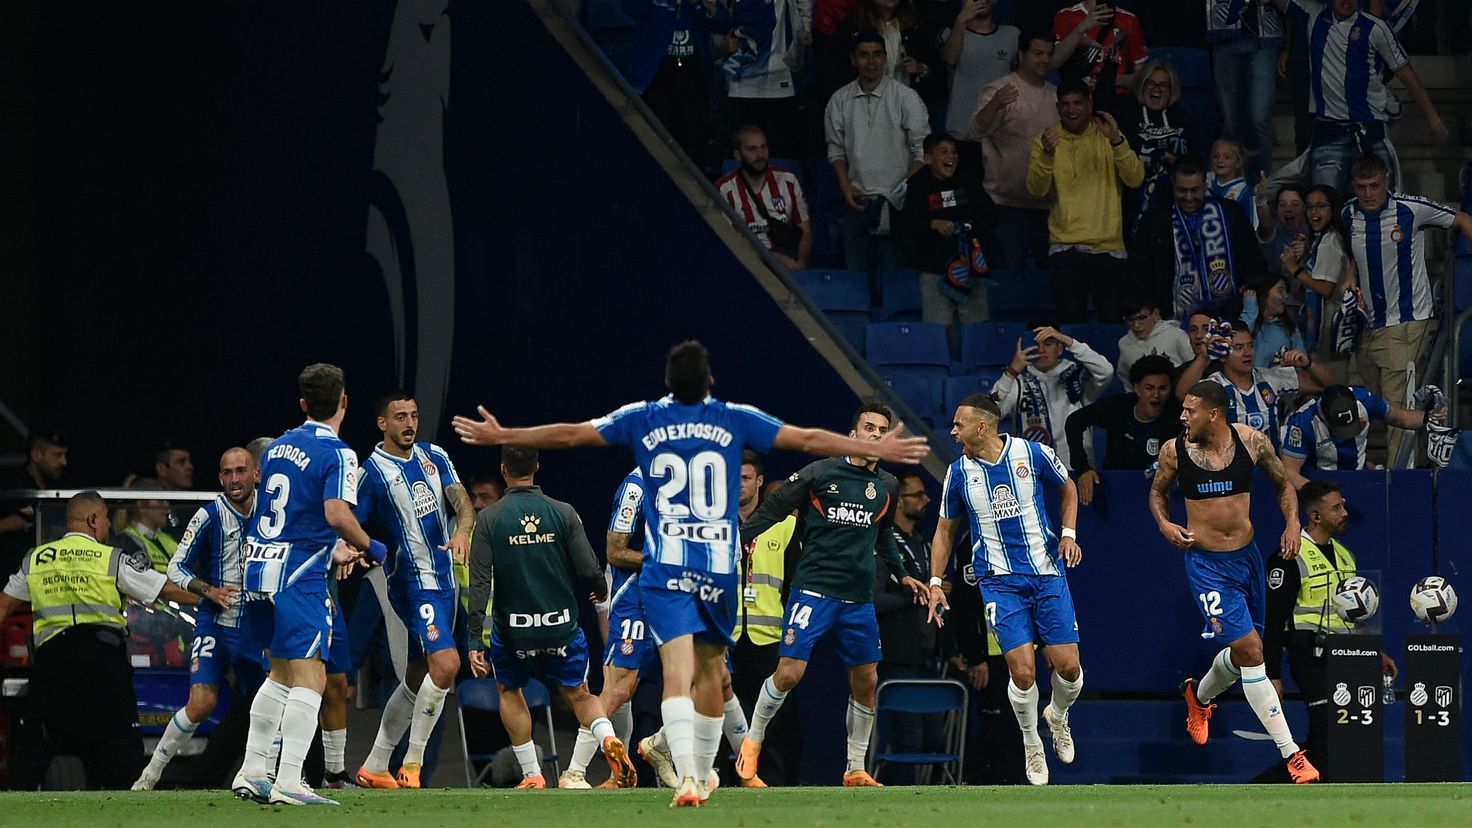 Espanyol is saved in nine out of ten scenarios if they win both games
